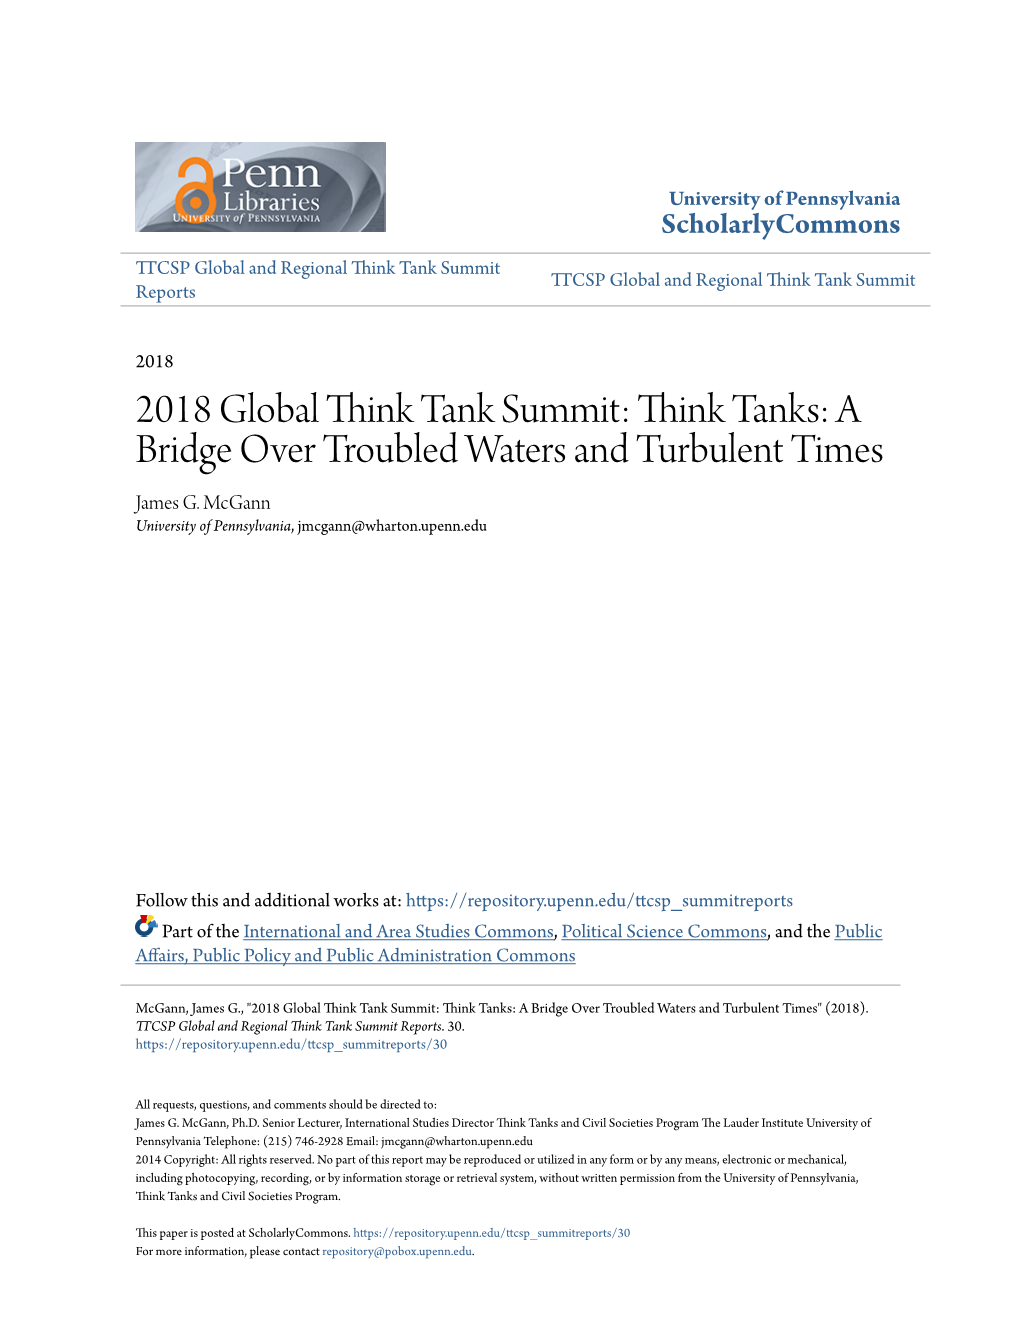 2018 Global Think Tank Summit: Think Tanks: a Bridge Over Troubled Waters and Turbulent Times